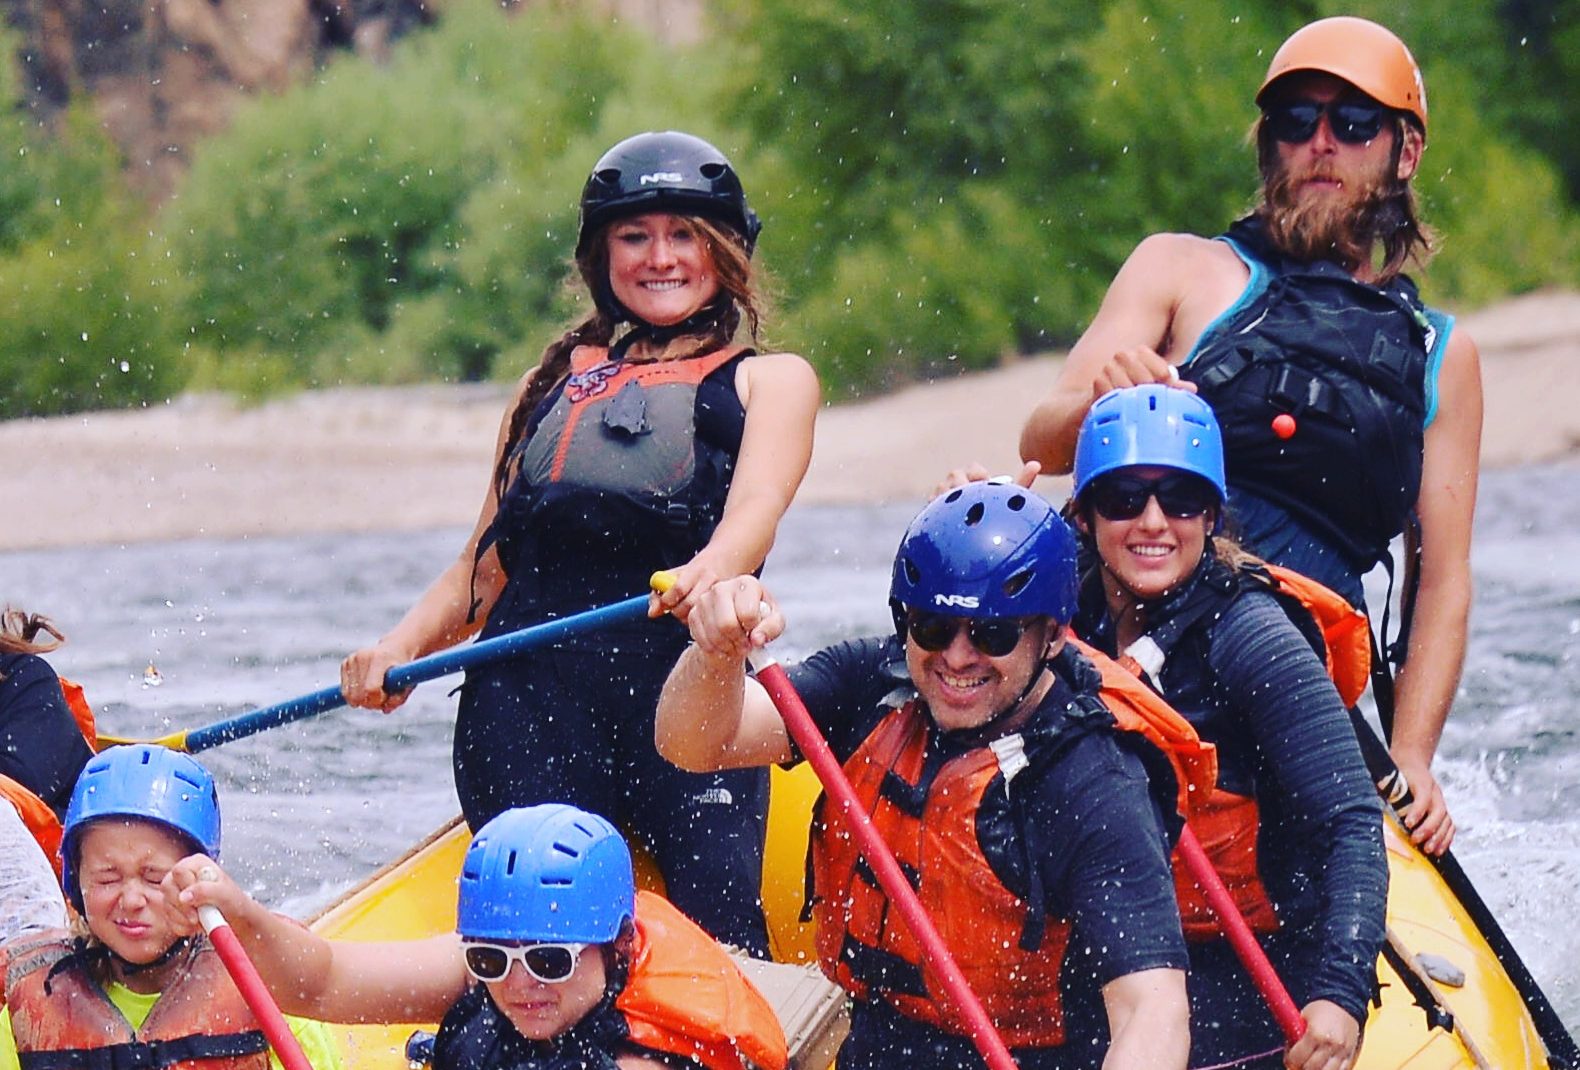 Adventure guides rafting on the Arkansas River in Colorado.